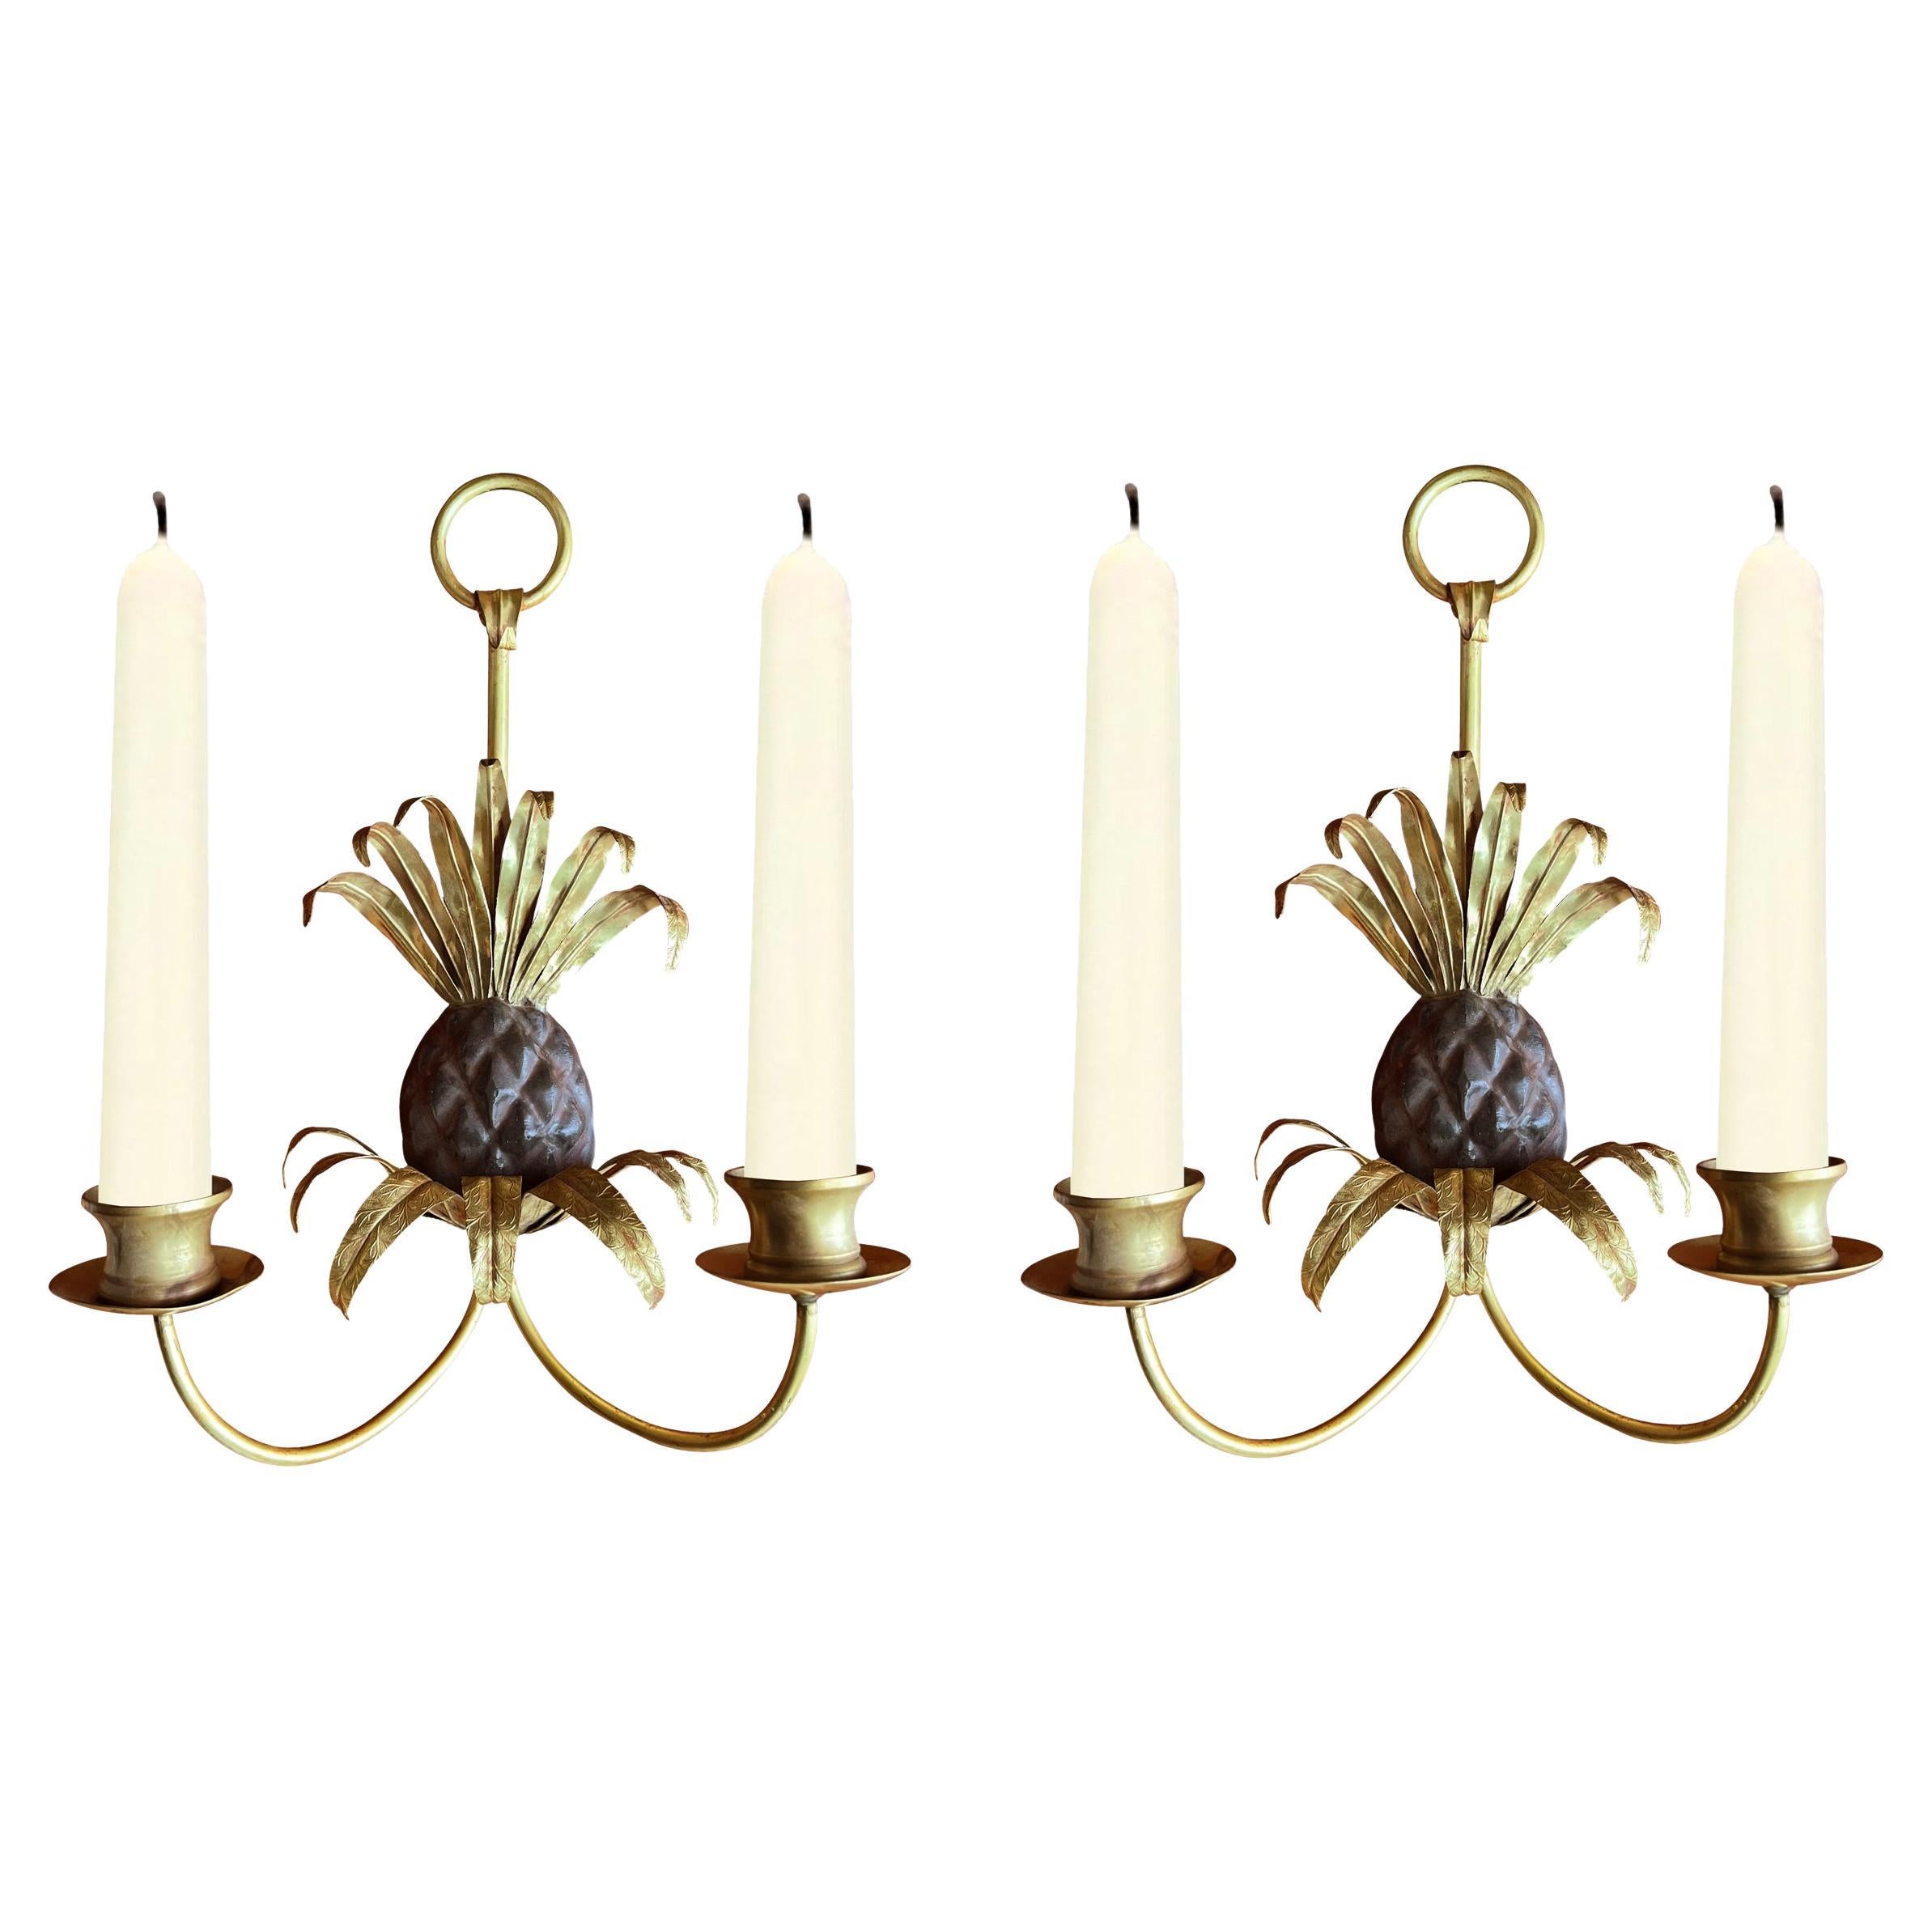 Pair of Vintage Pineapple Candle Sconces